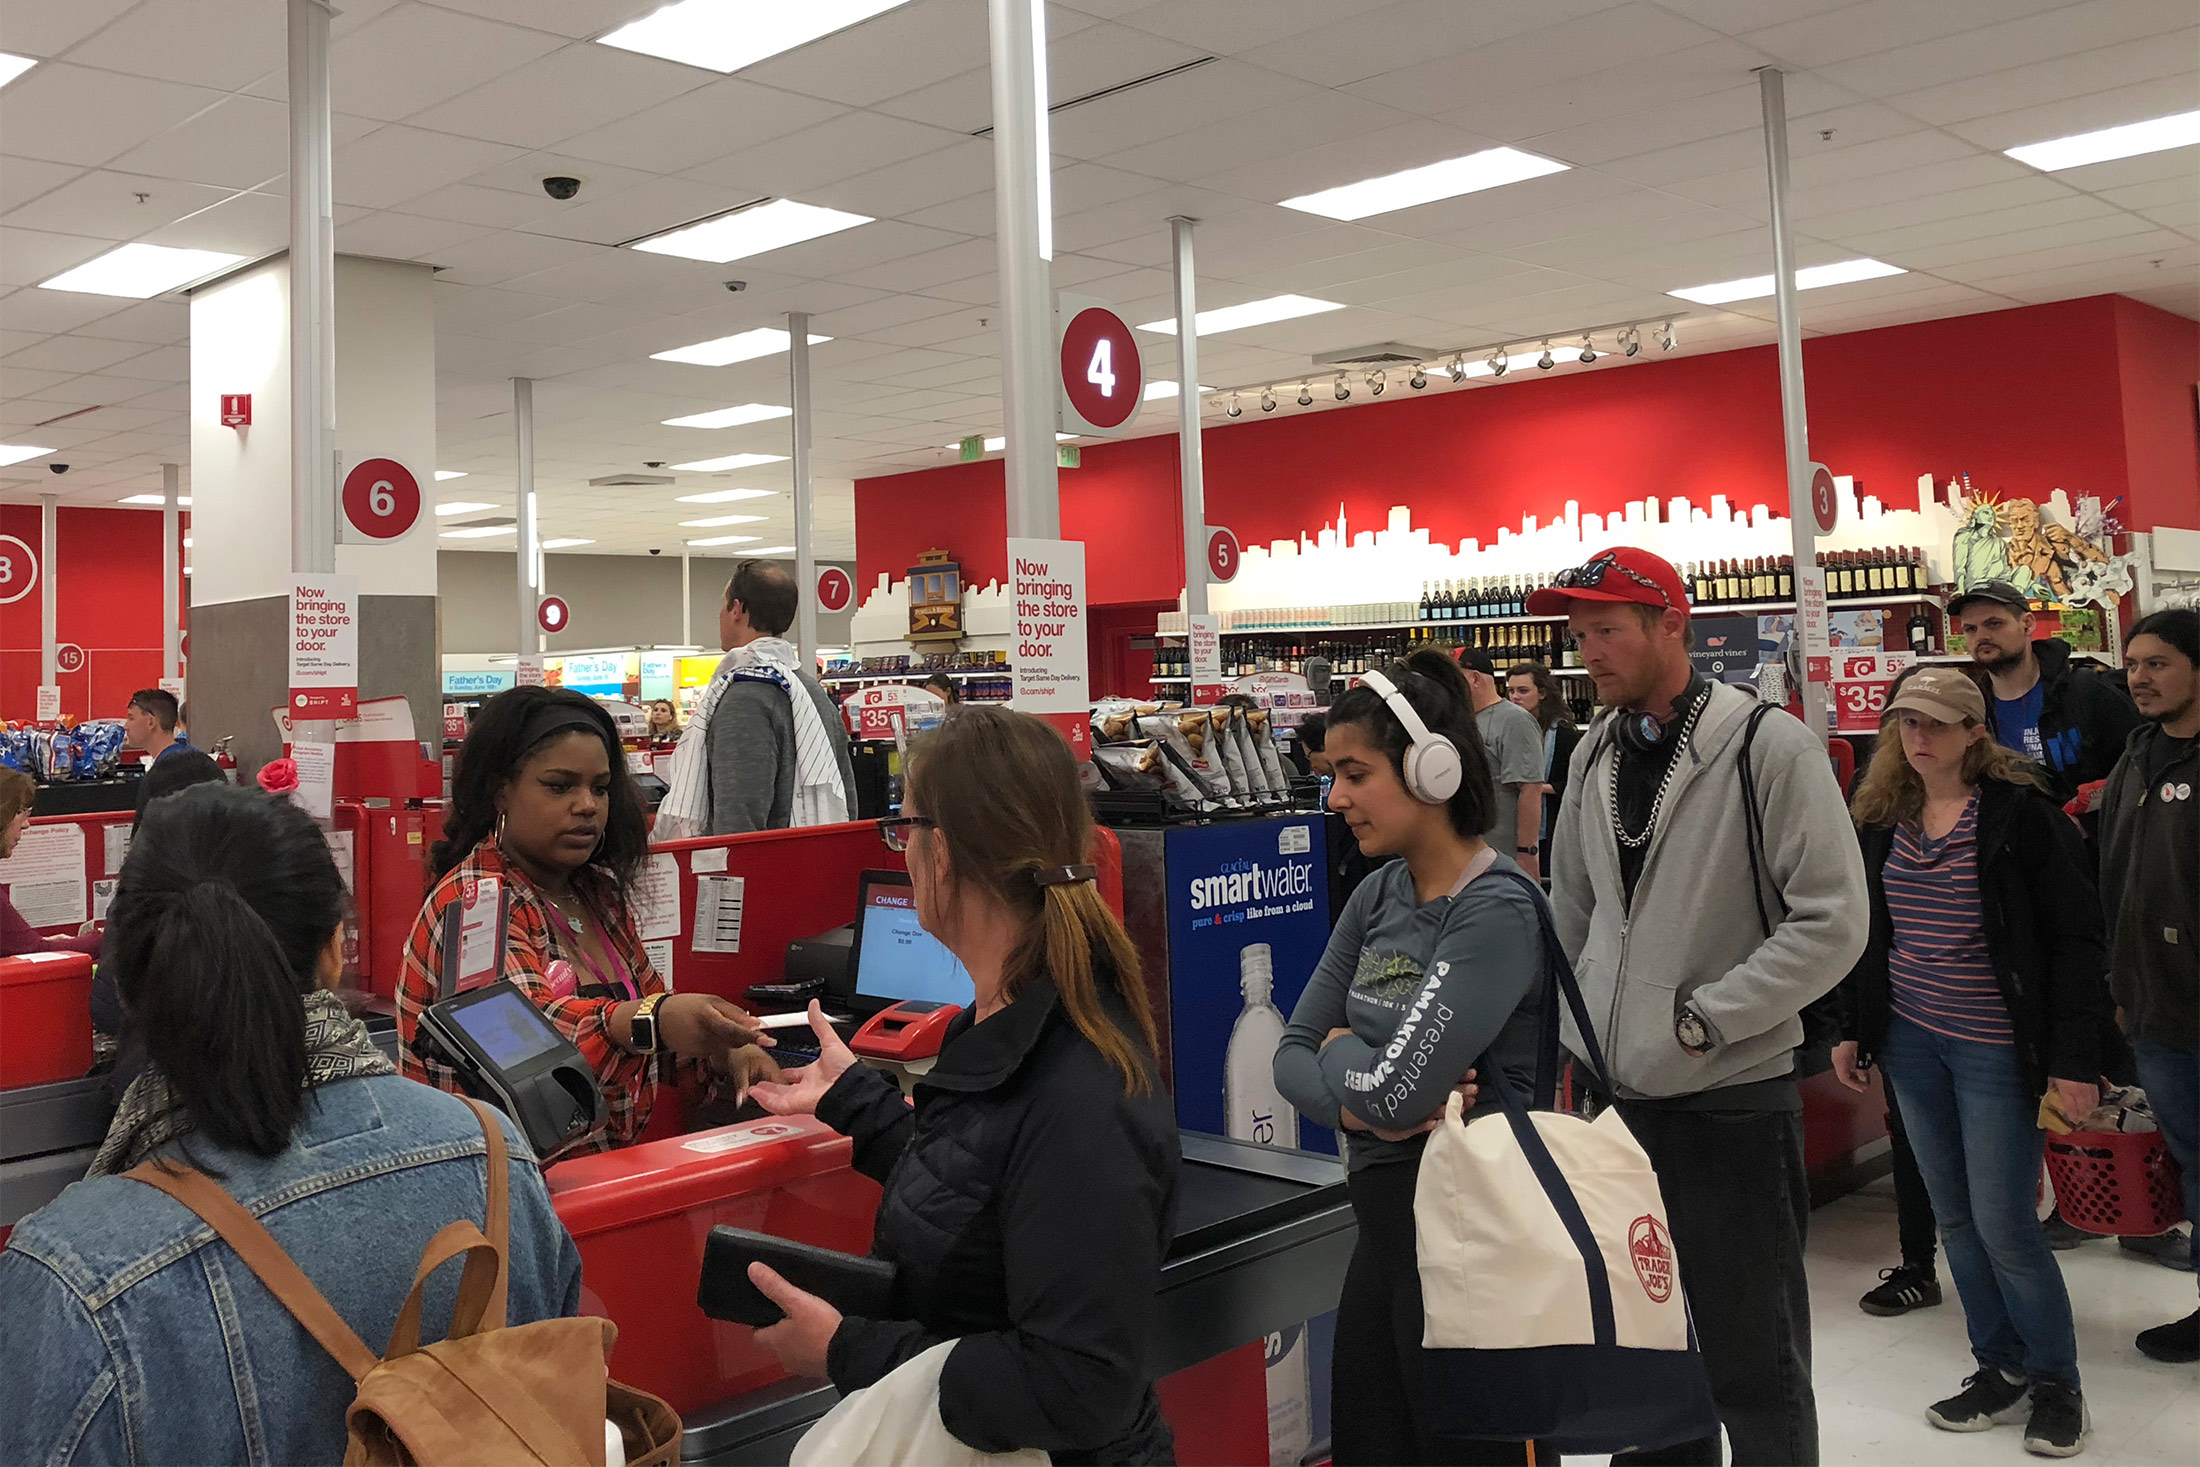 Target (TGT) Register Outage Could Be a 50 Million Hit Bloomberg